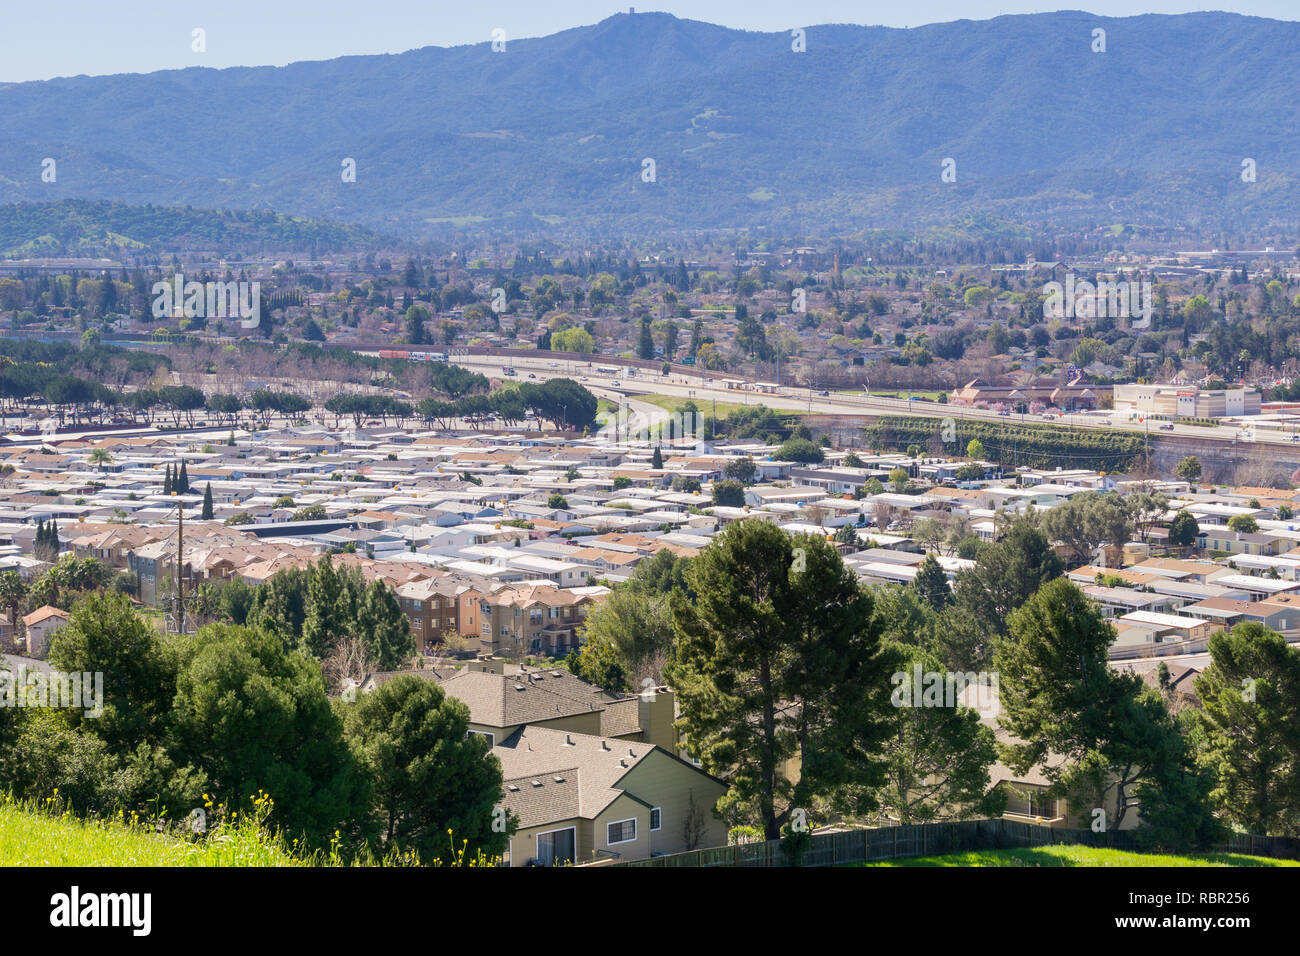 View towards Guadalupe Freeway and Almaden Valley from Communications Hill, San Jose, California Stock Photo